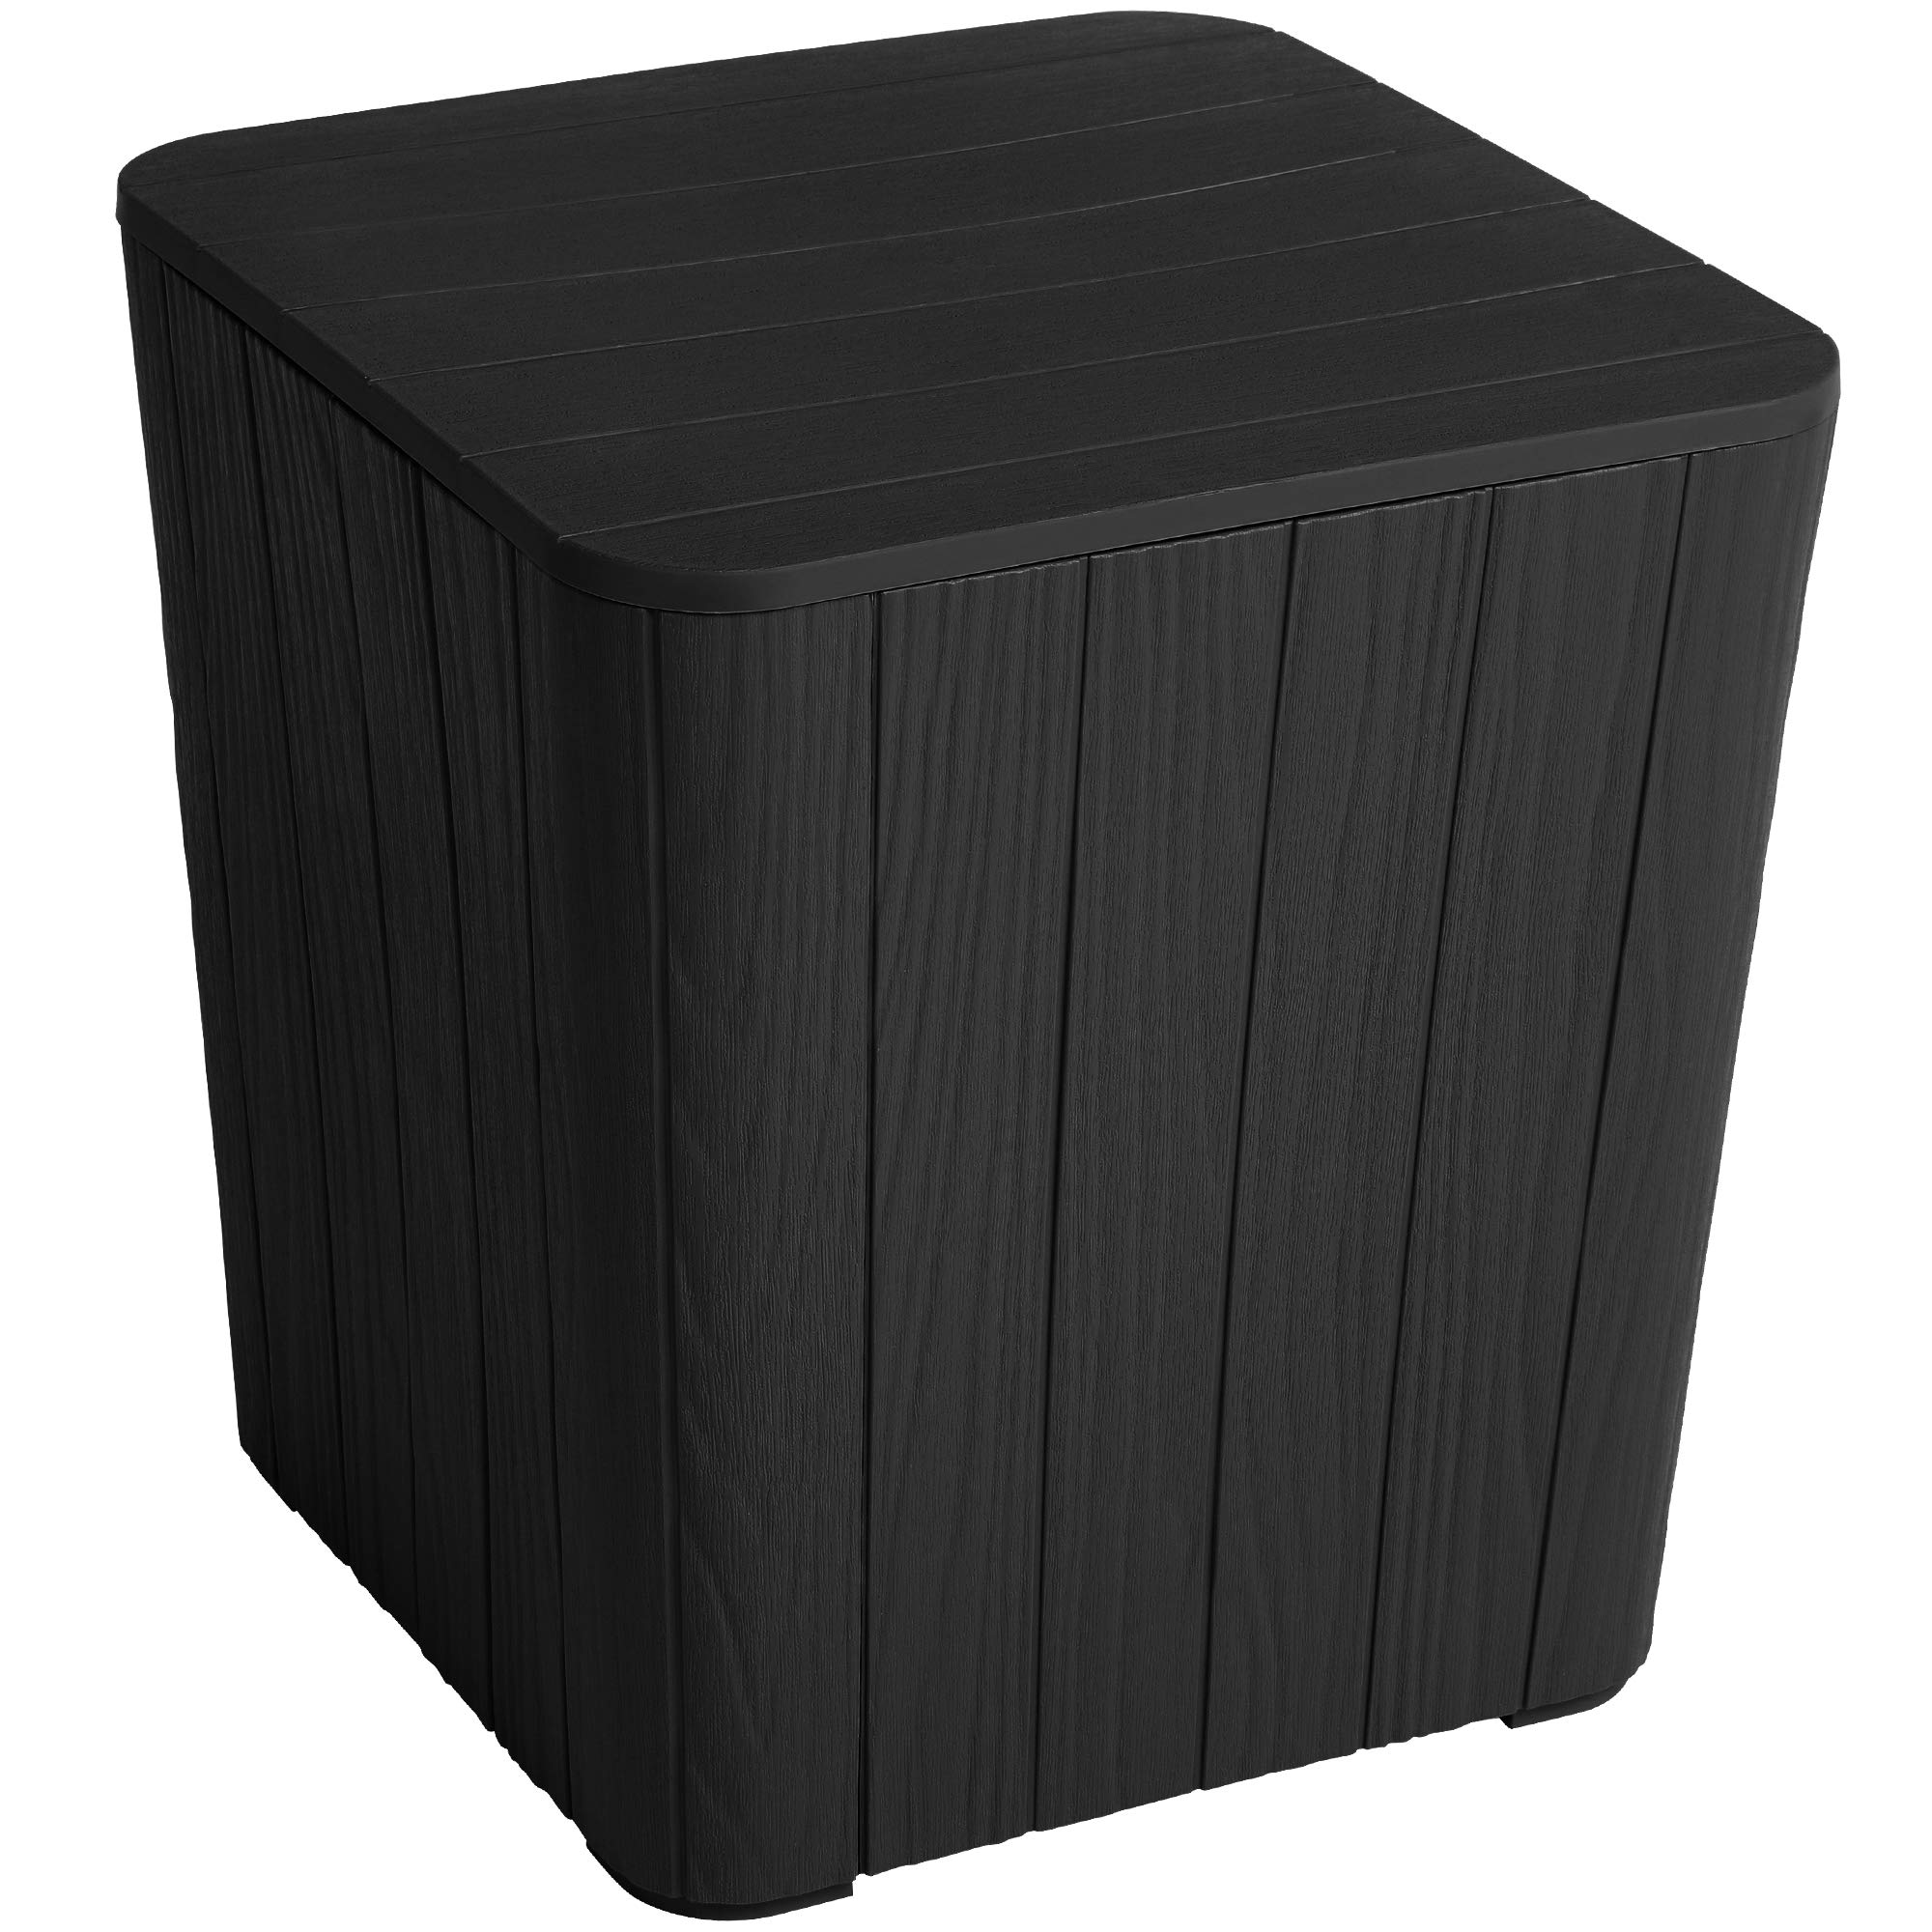 YITAHOME 11.5 Gallon Outdoor Side Table with Storage Small End Table for Coffee, Patio Decor,Cushions(Black)